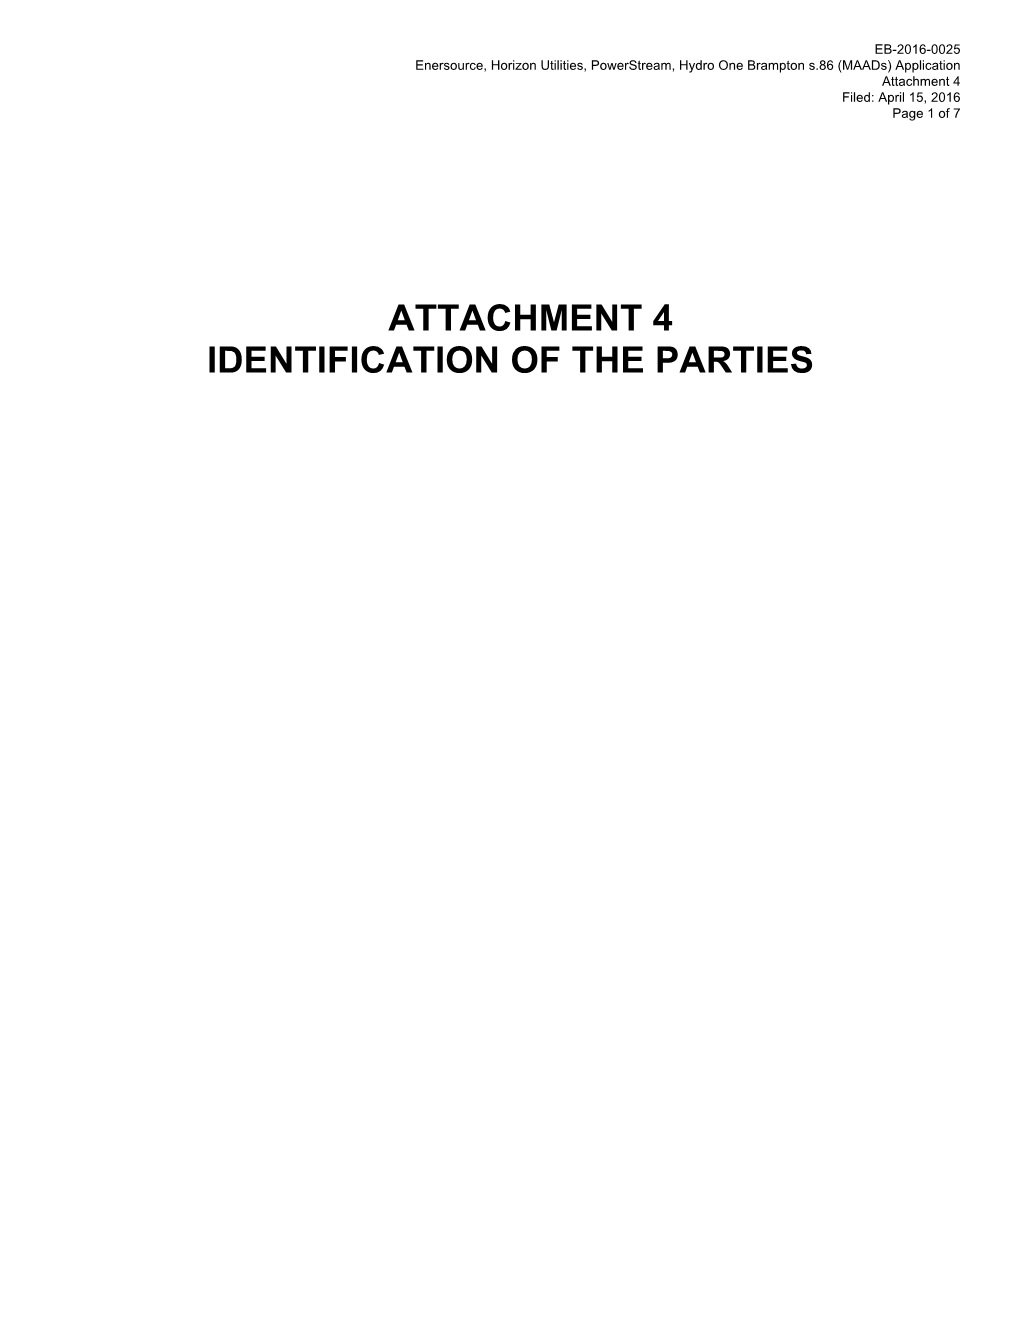 Attachment 4 Identification of the Parties